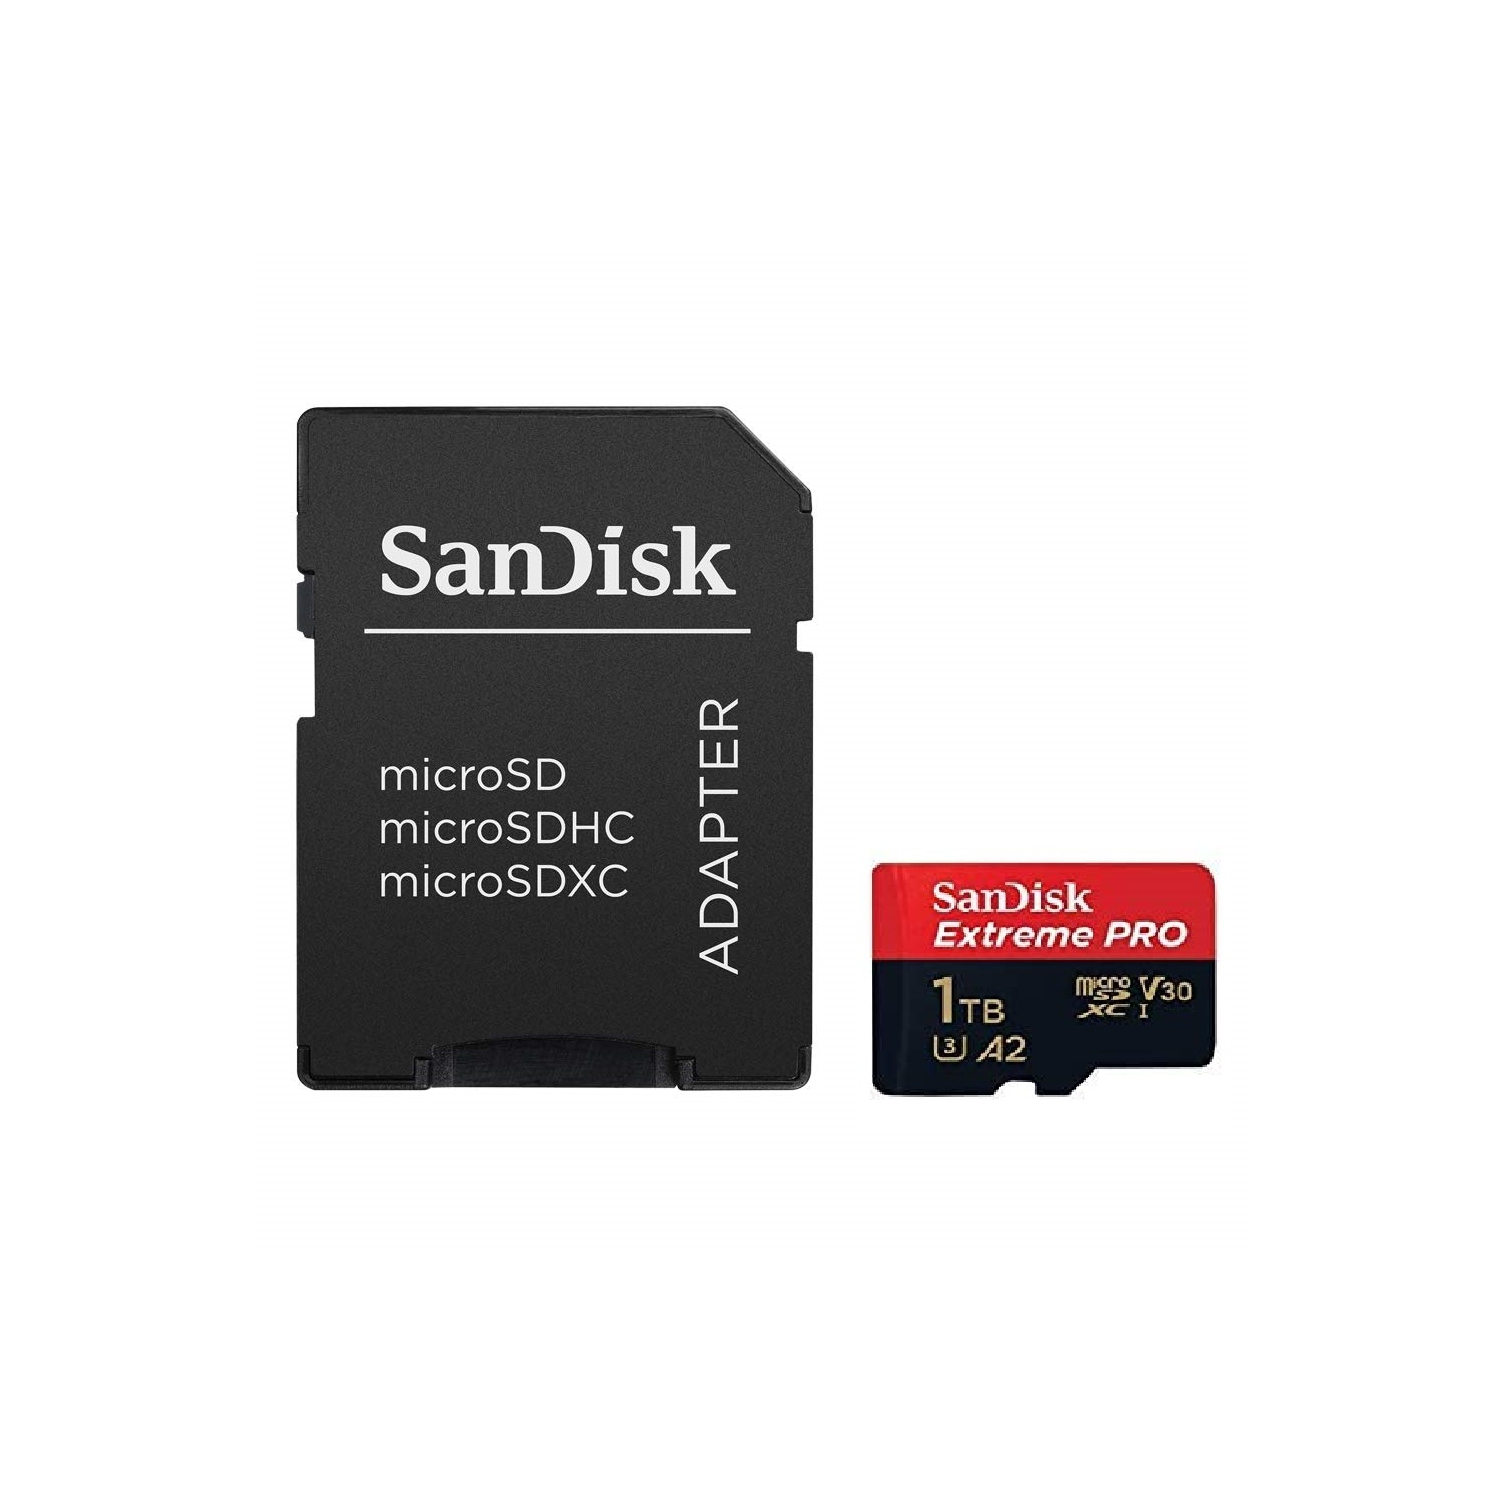 SanDisk Extreme PRO 1TB microSDXC UHS-I micro SD Card with Adapter 